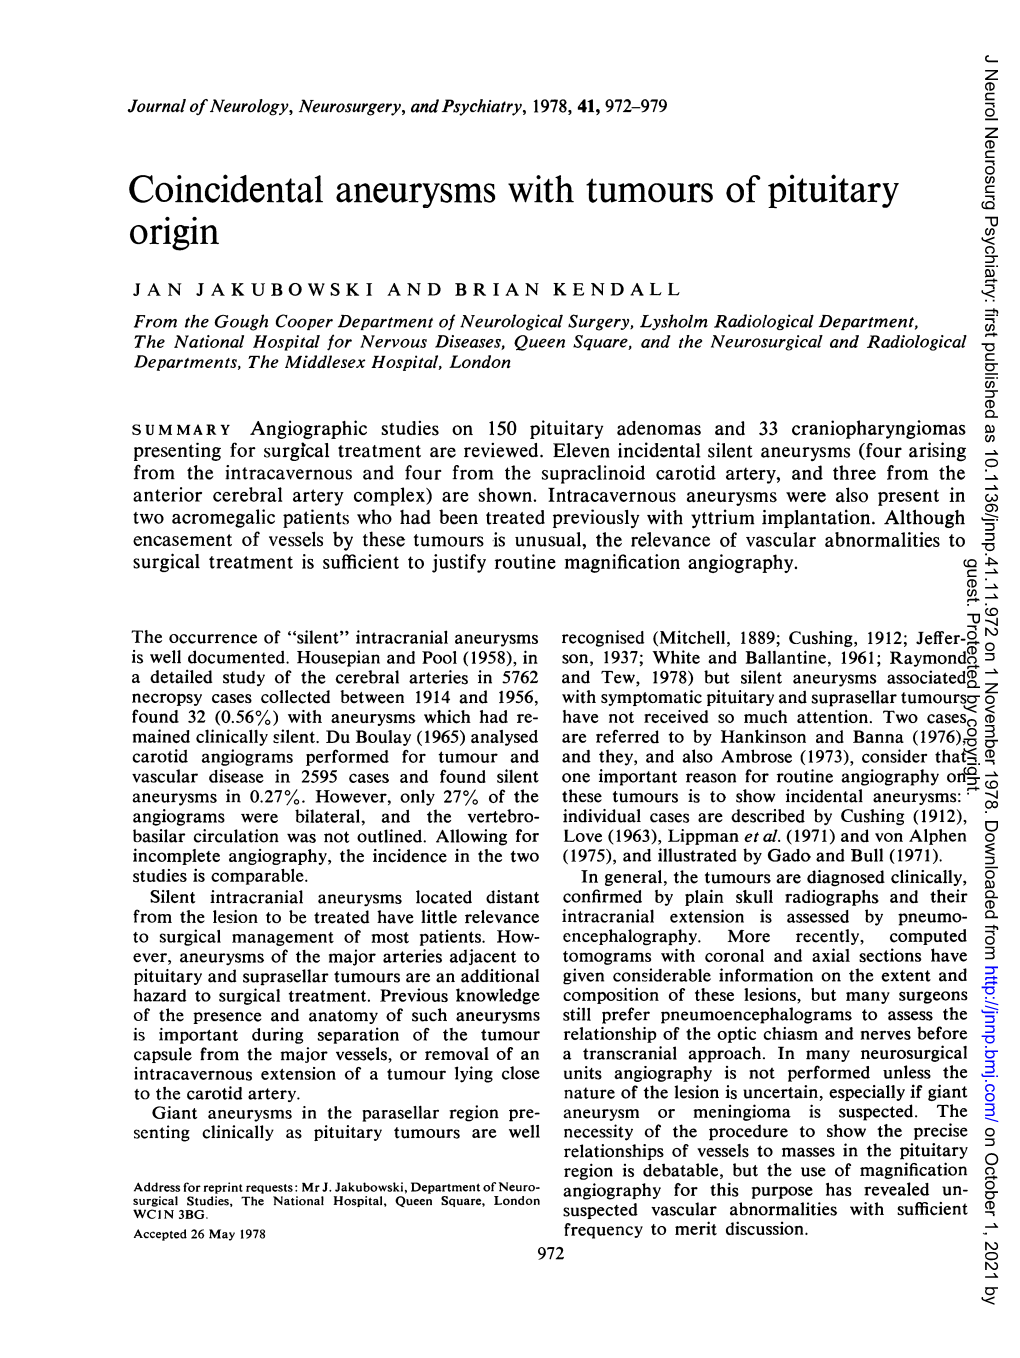 Coincidental Aneurysms with Tumours of Pituitary Origin